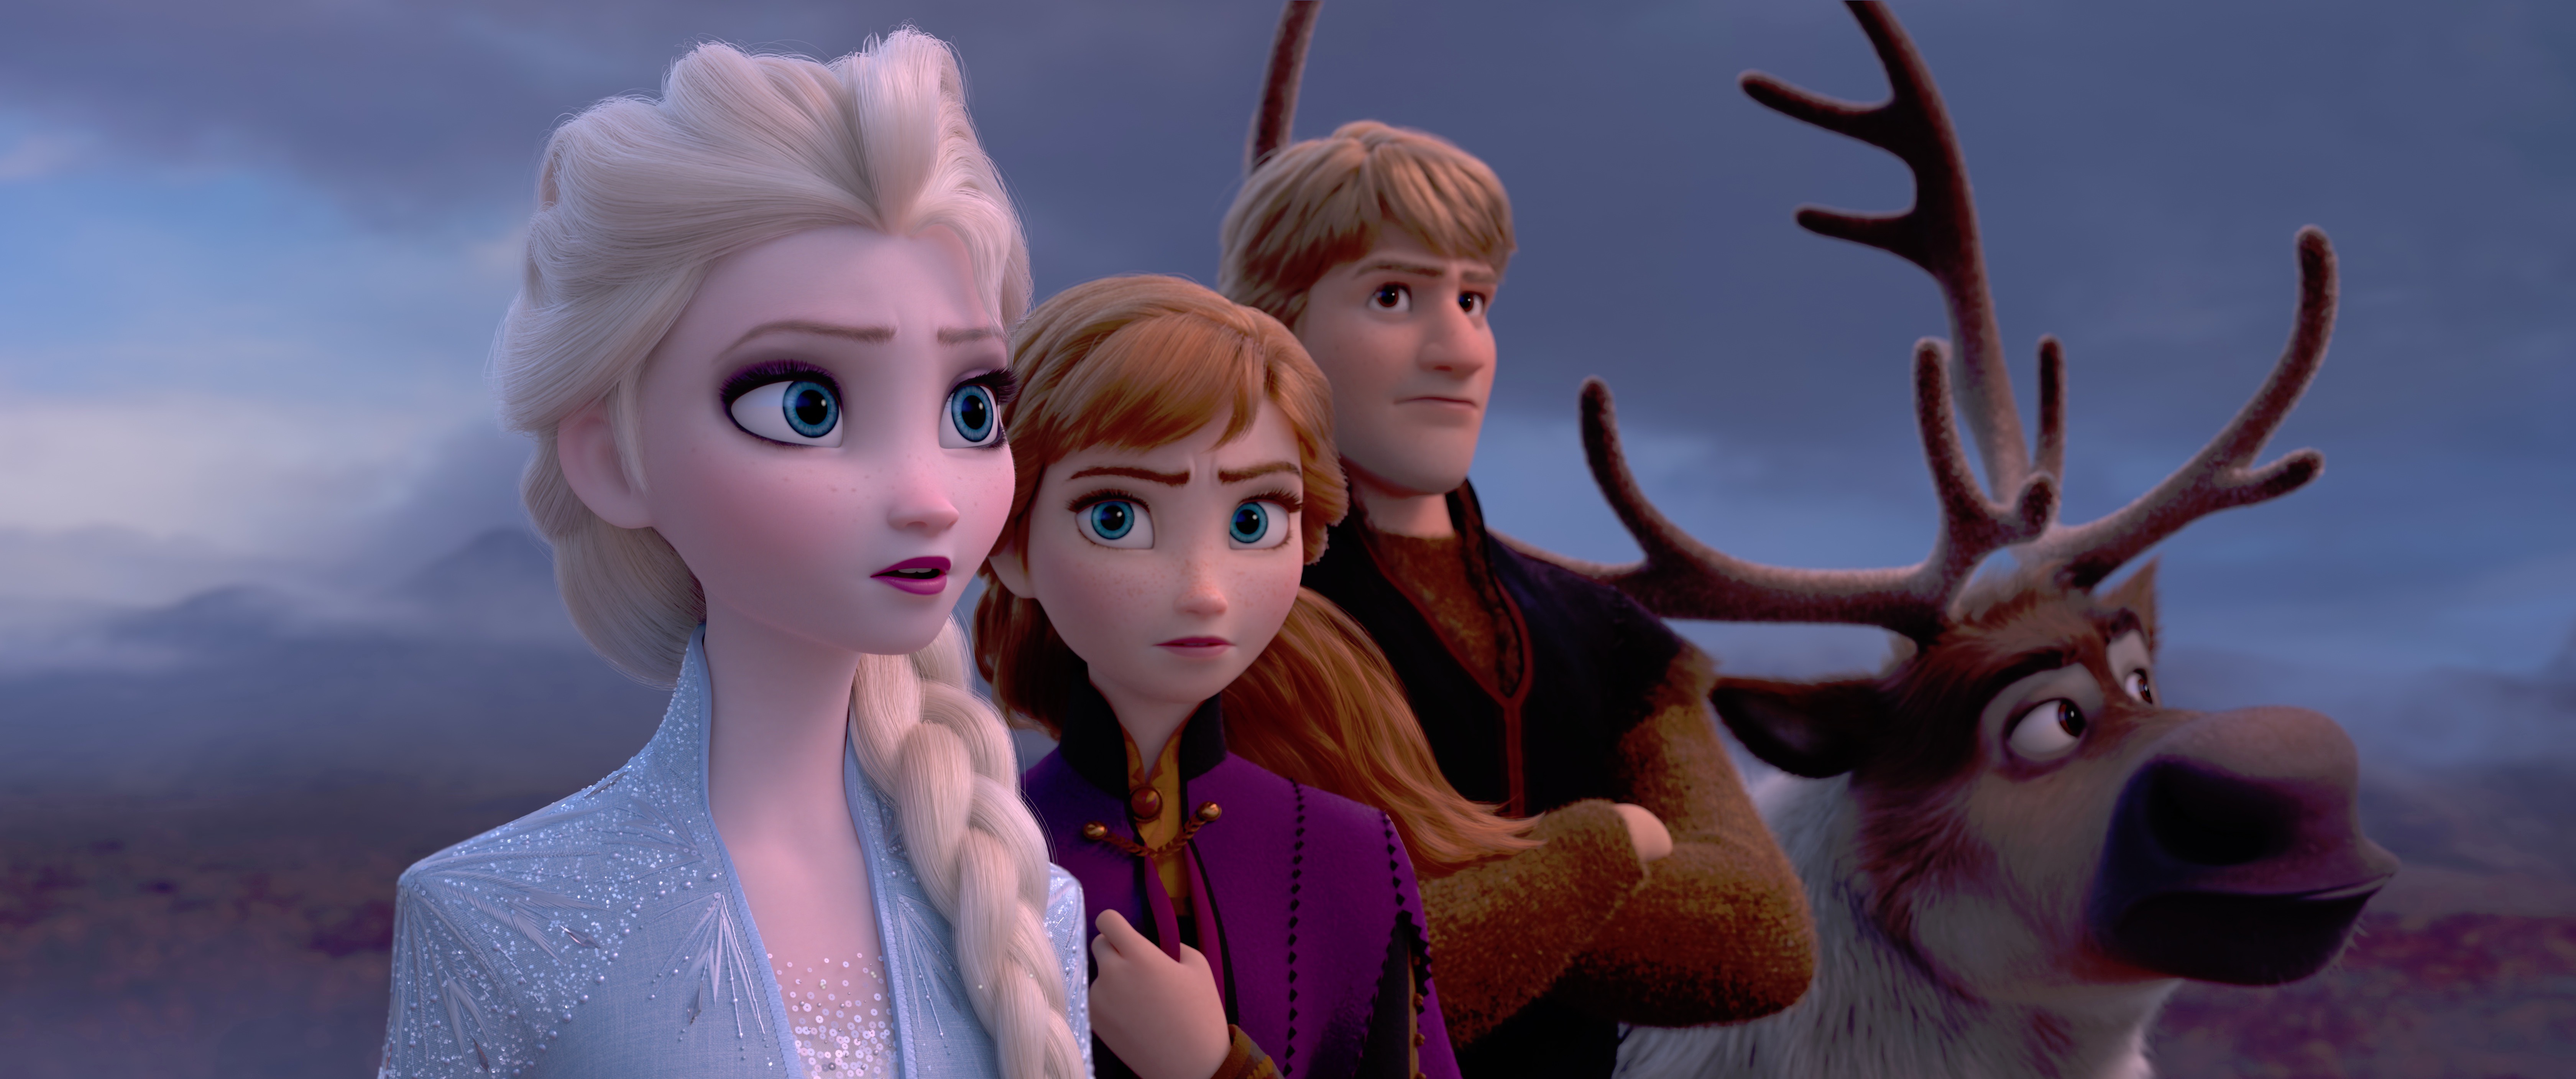 Frozen 2 Reviews Have Hit: Here’s What Critics Are Saying